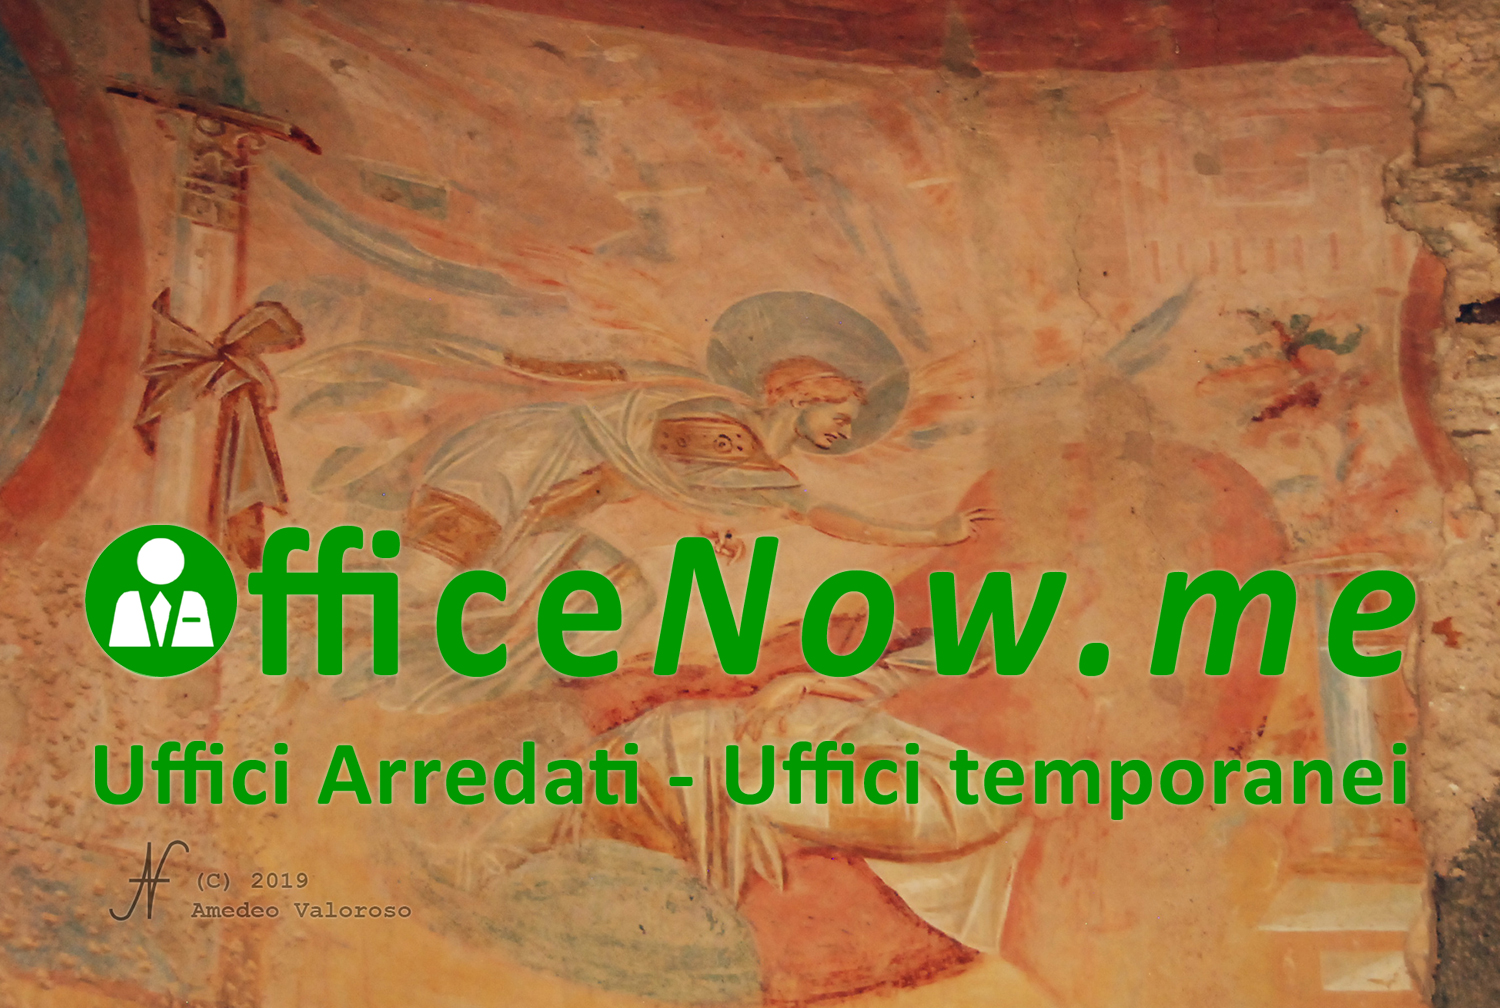 OfficeNow, business center, furnished offices, temporary offices, Castelseprio, Santa Maria Foris Porta, frescoes, apocryphal gospels, Madonna, corporate meeting and art